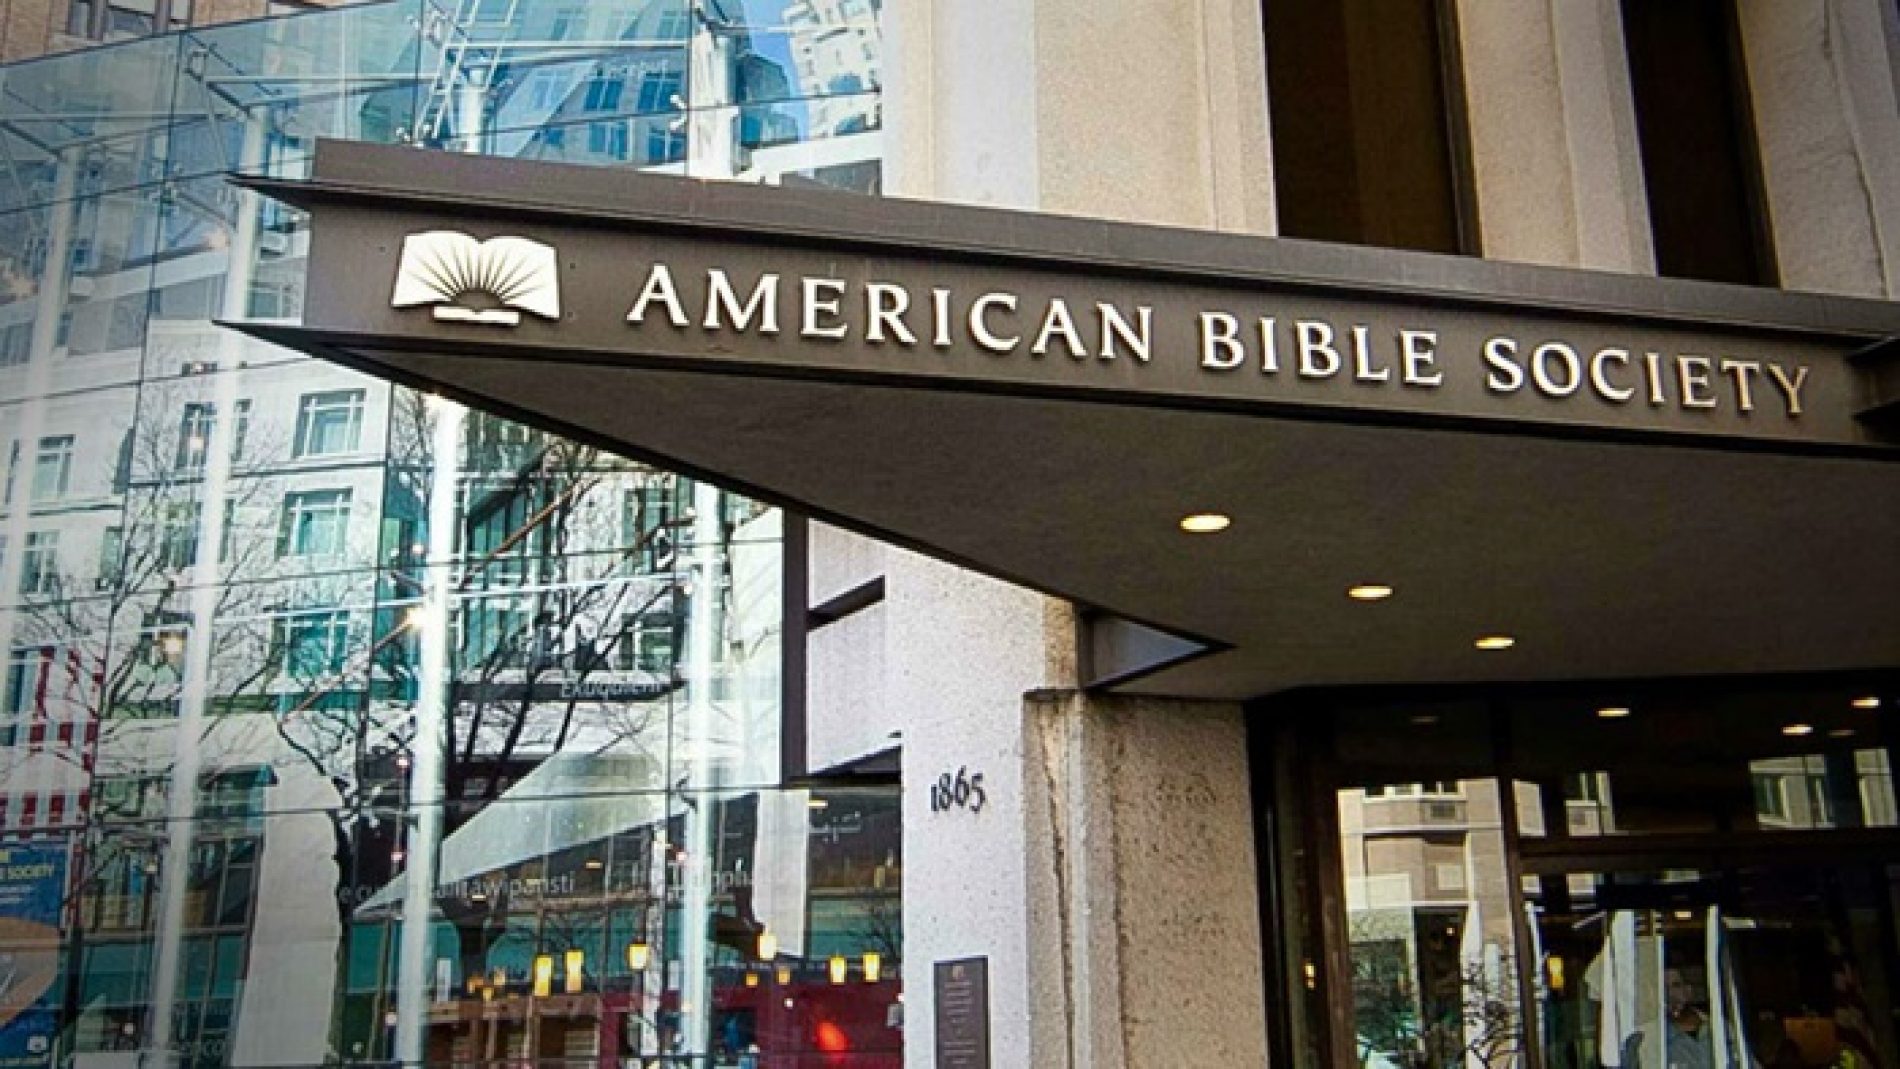 Employees of American Bible Society given ultimatum to either sign anti-gay document or be out of a job